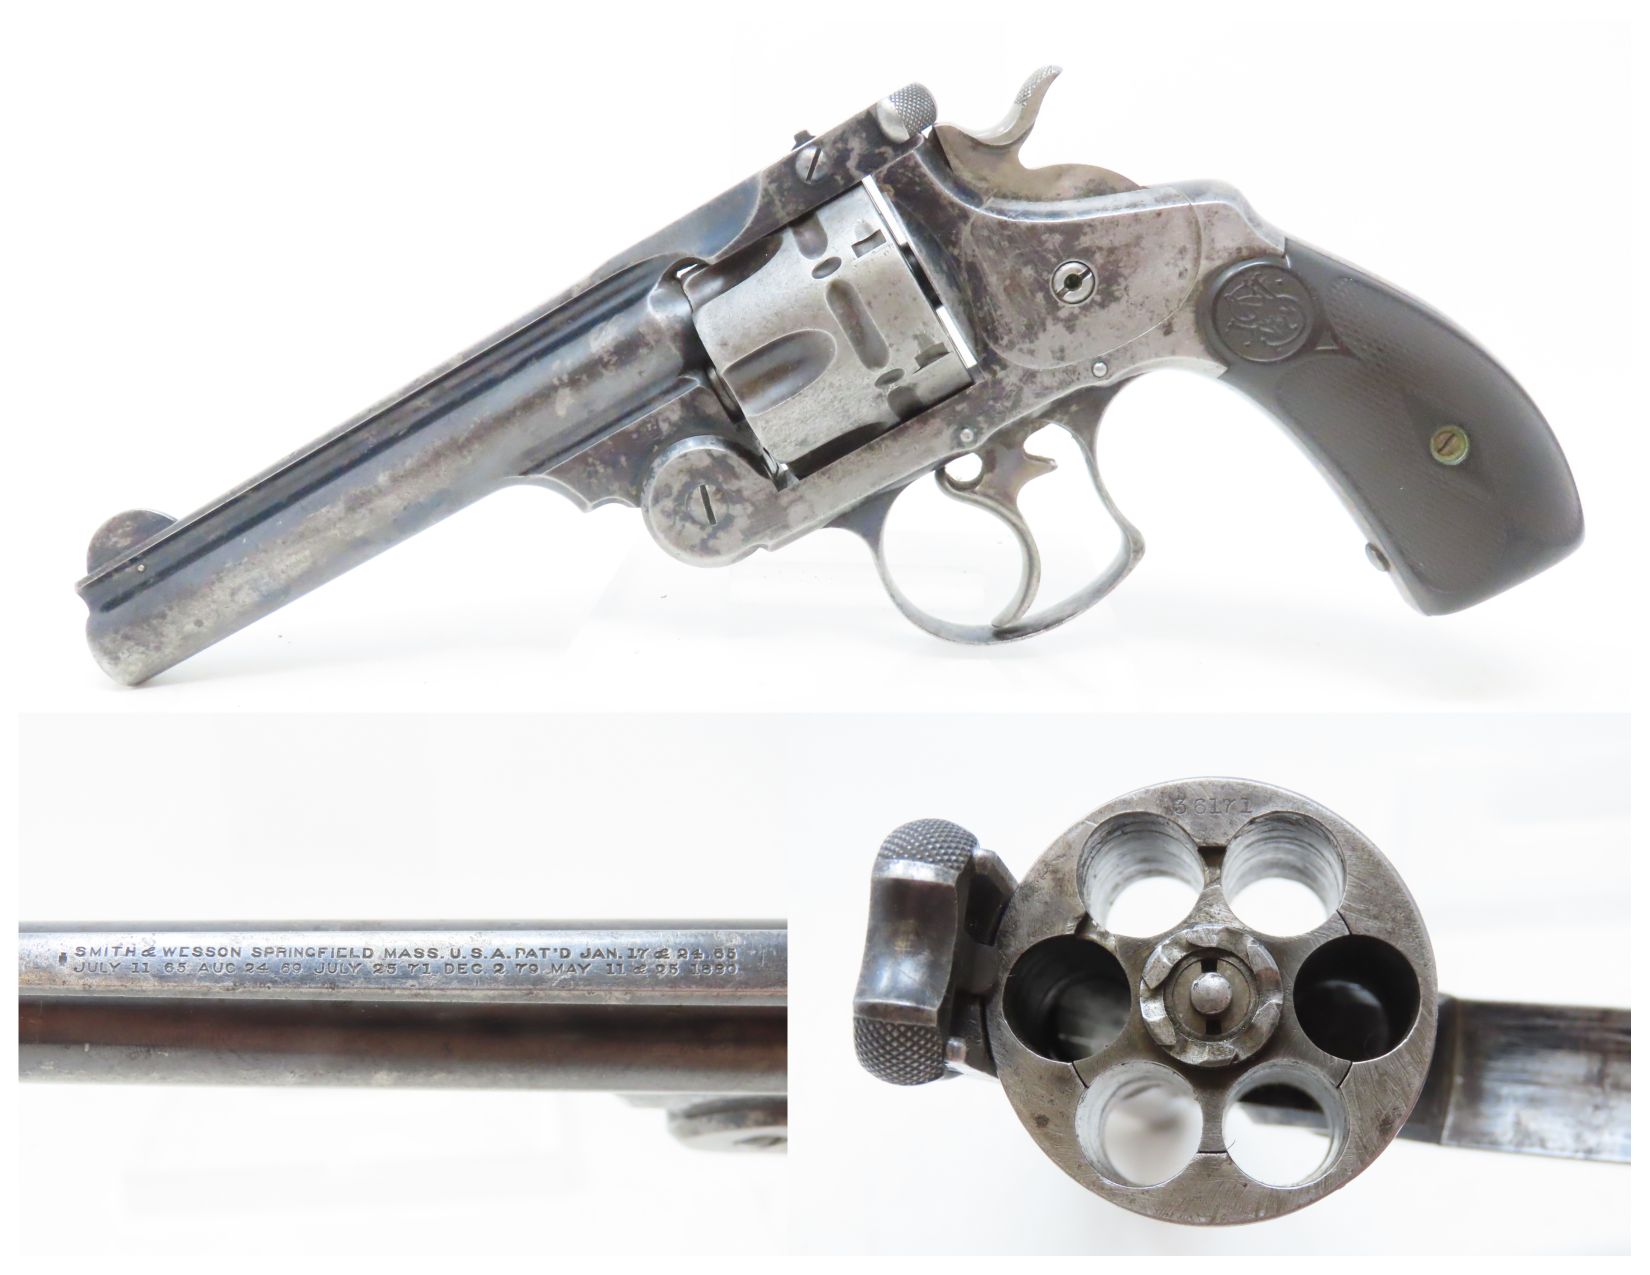 Smith & Wesson Double Action, First Model revolver, chambered in